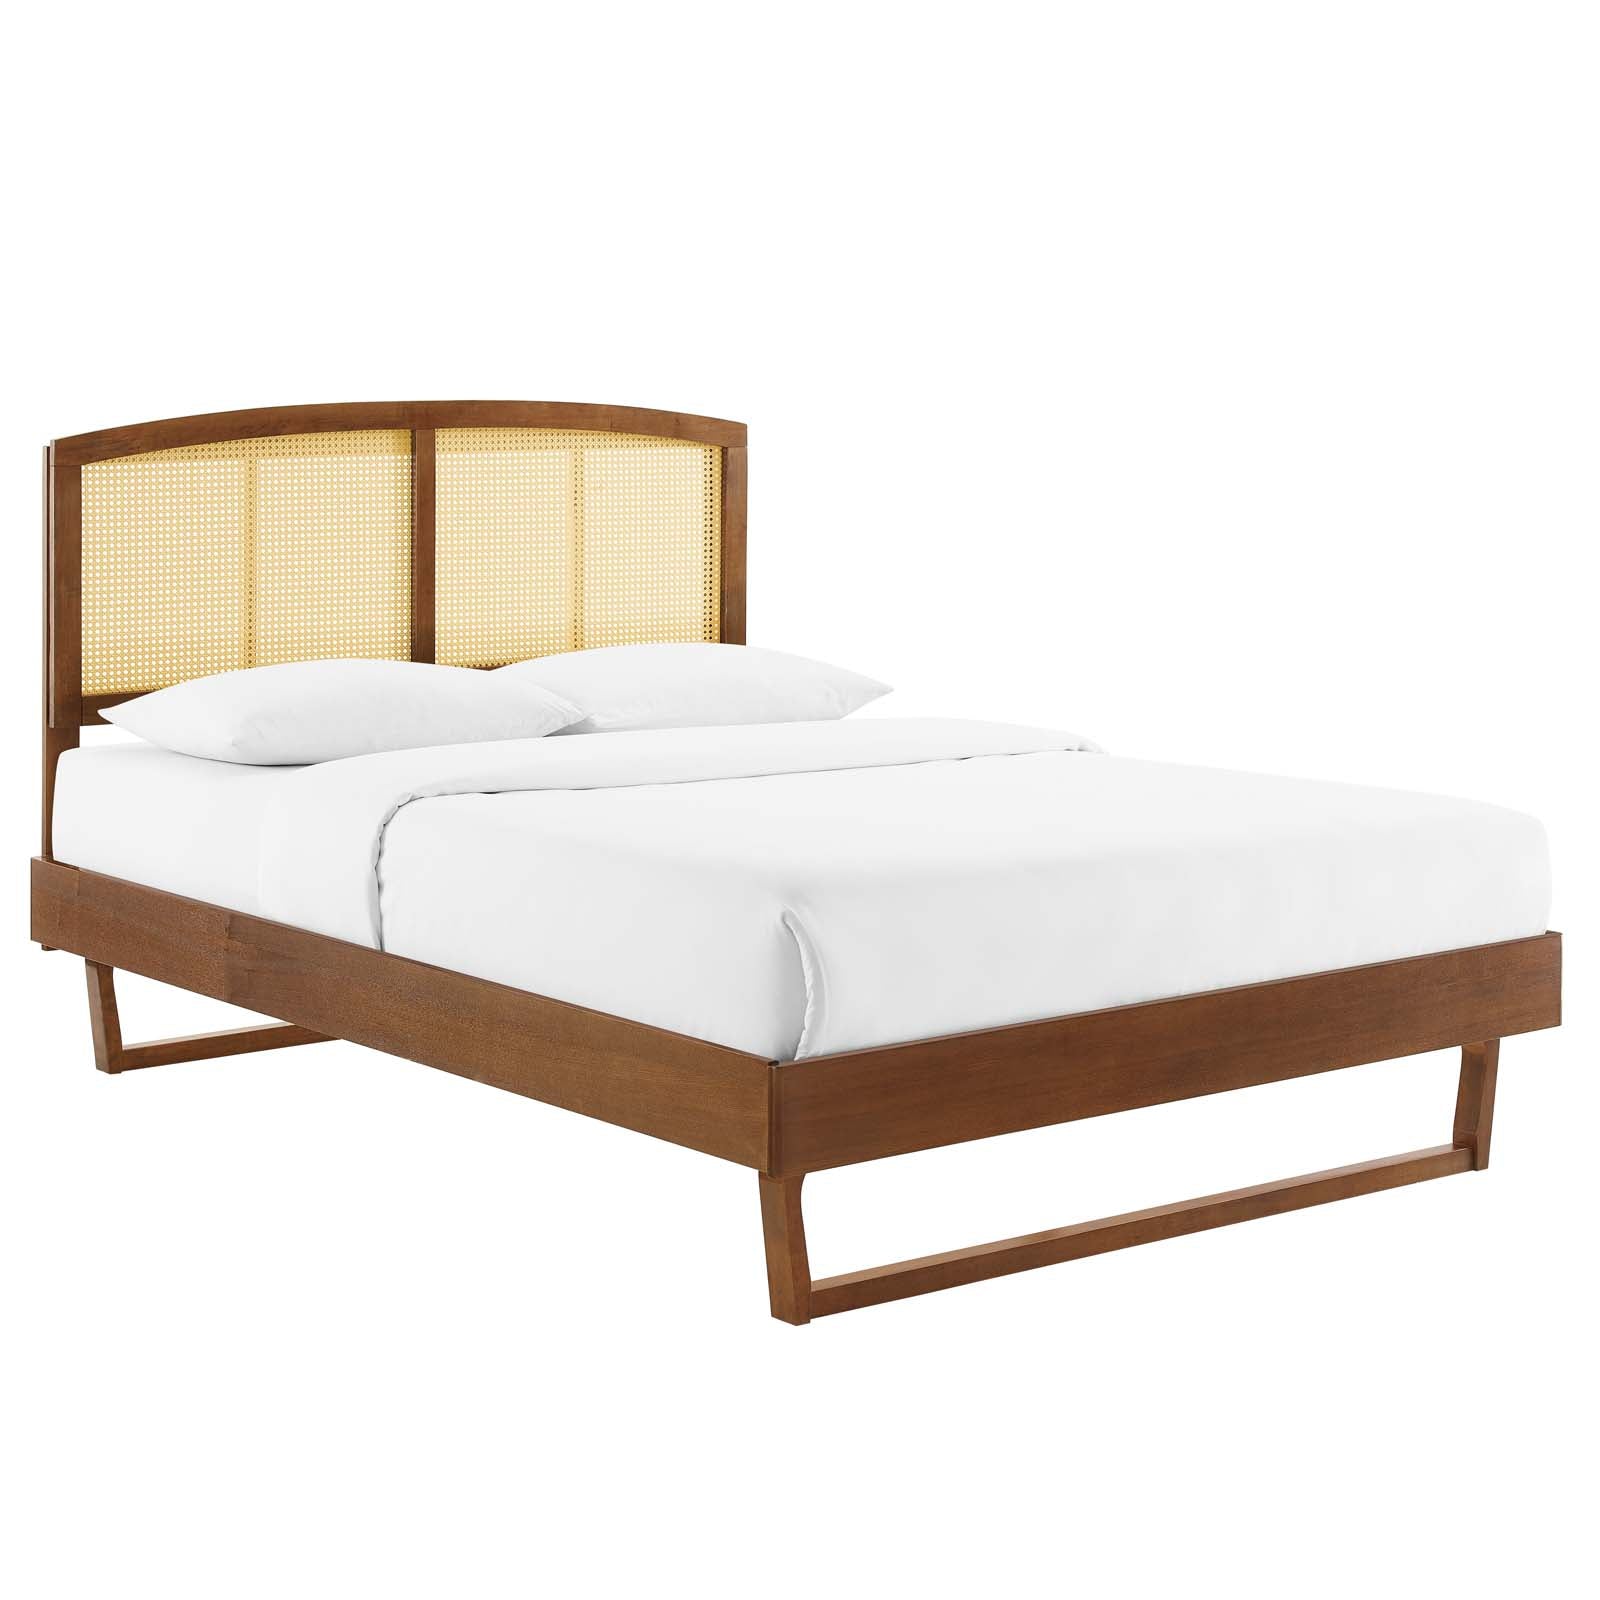 Modway Beds - Sierra-Cane-and-Wood-Full-Platform-Bed-With-Angular-Legs-Walnut